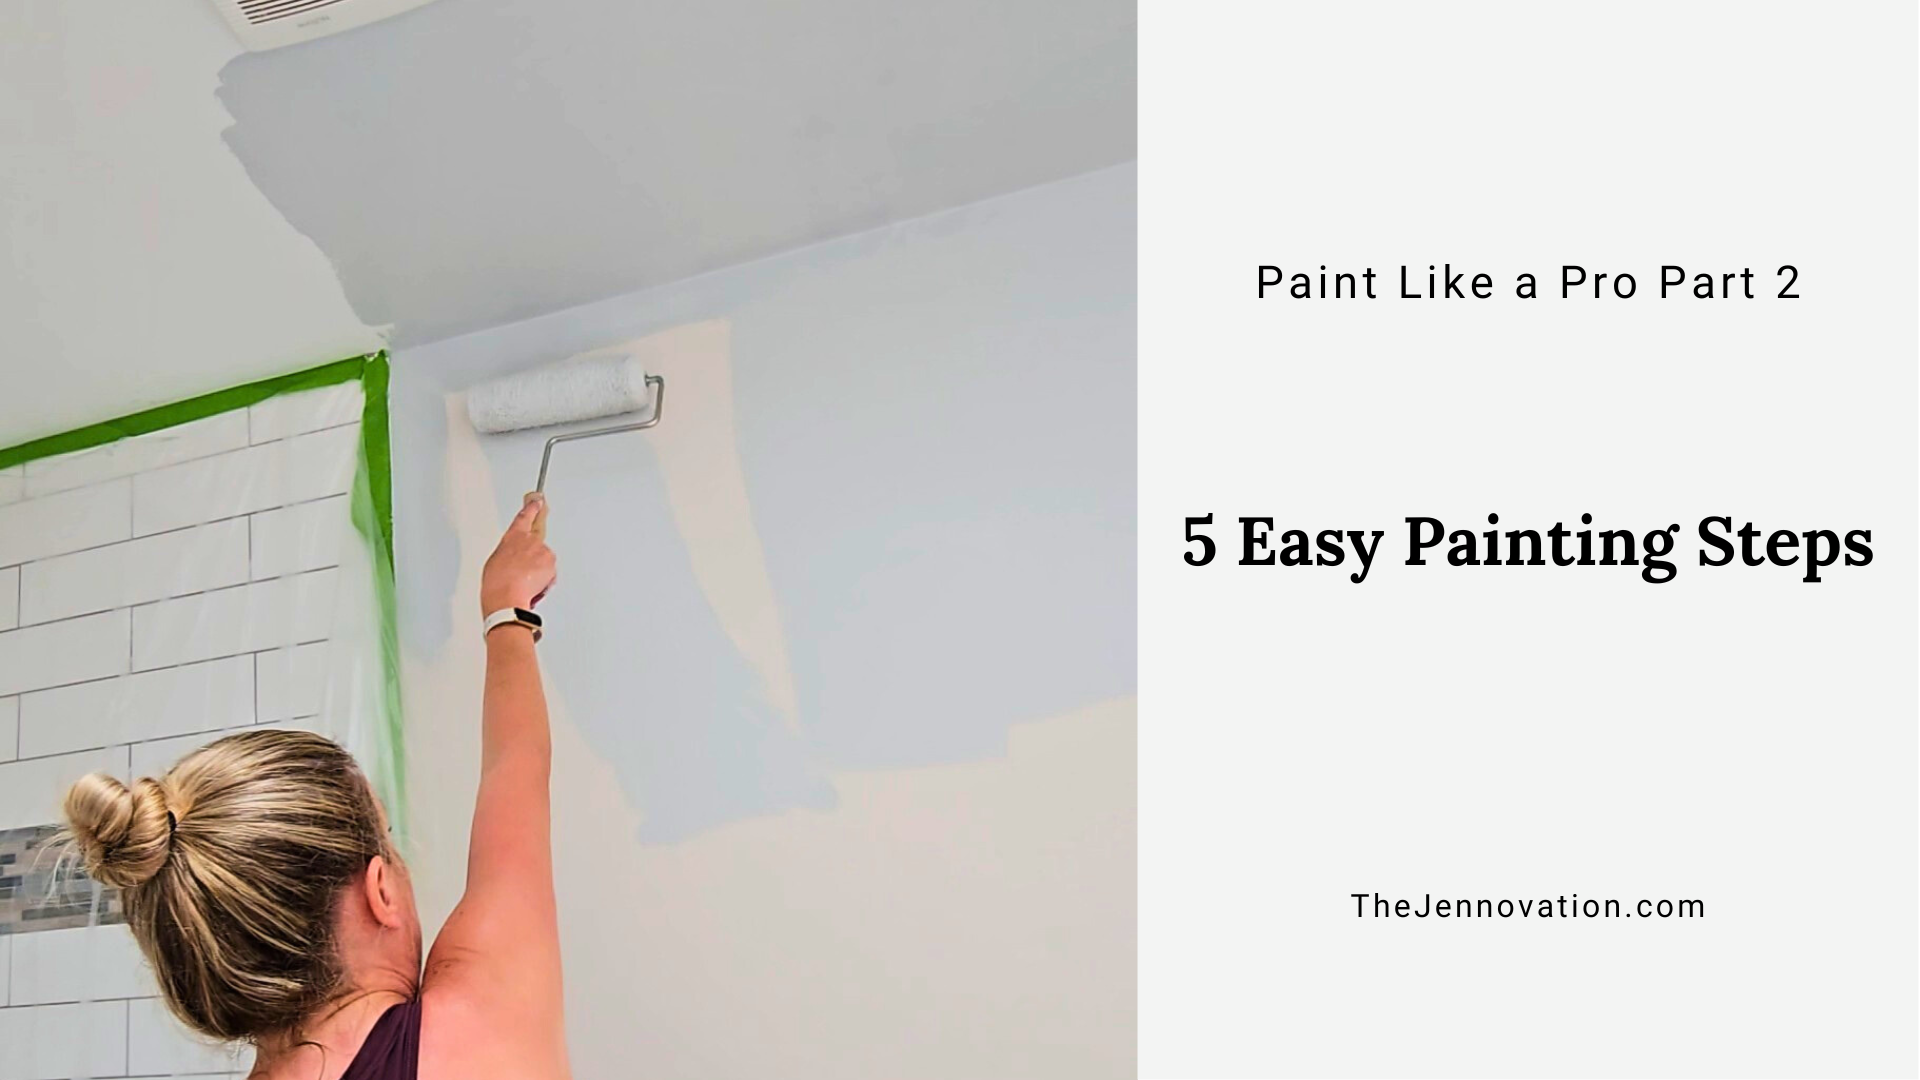 Painting Like a Pro in 5 Easy Steps